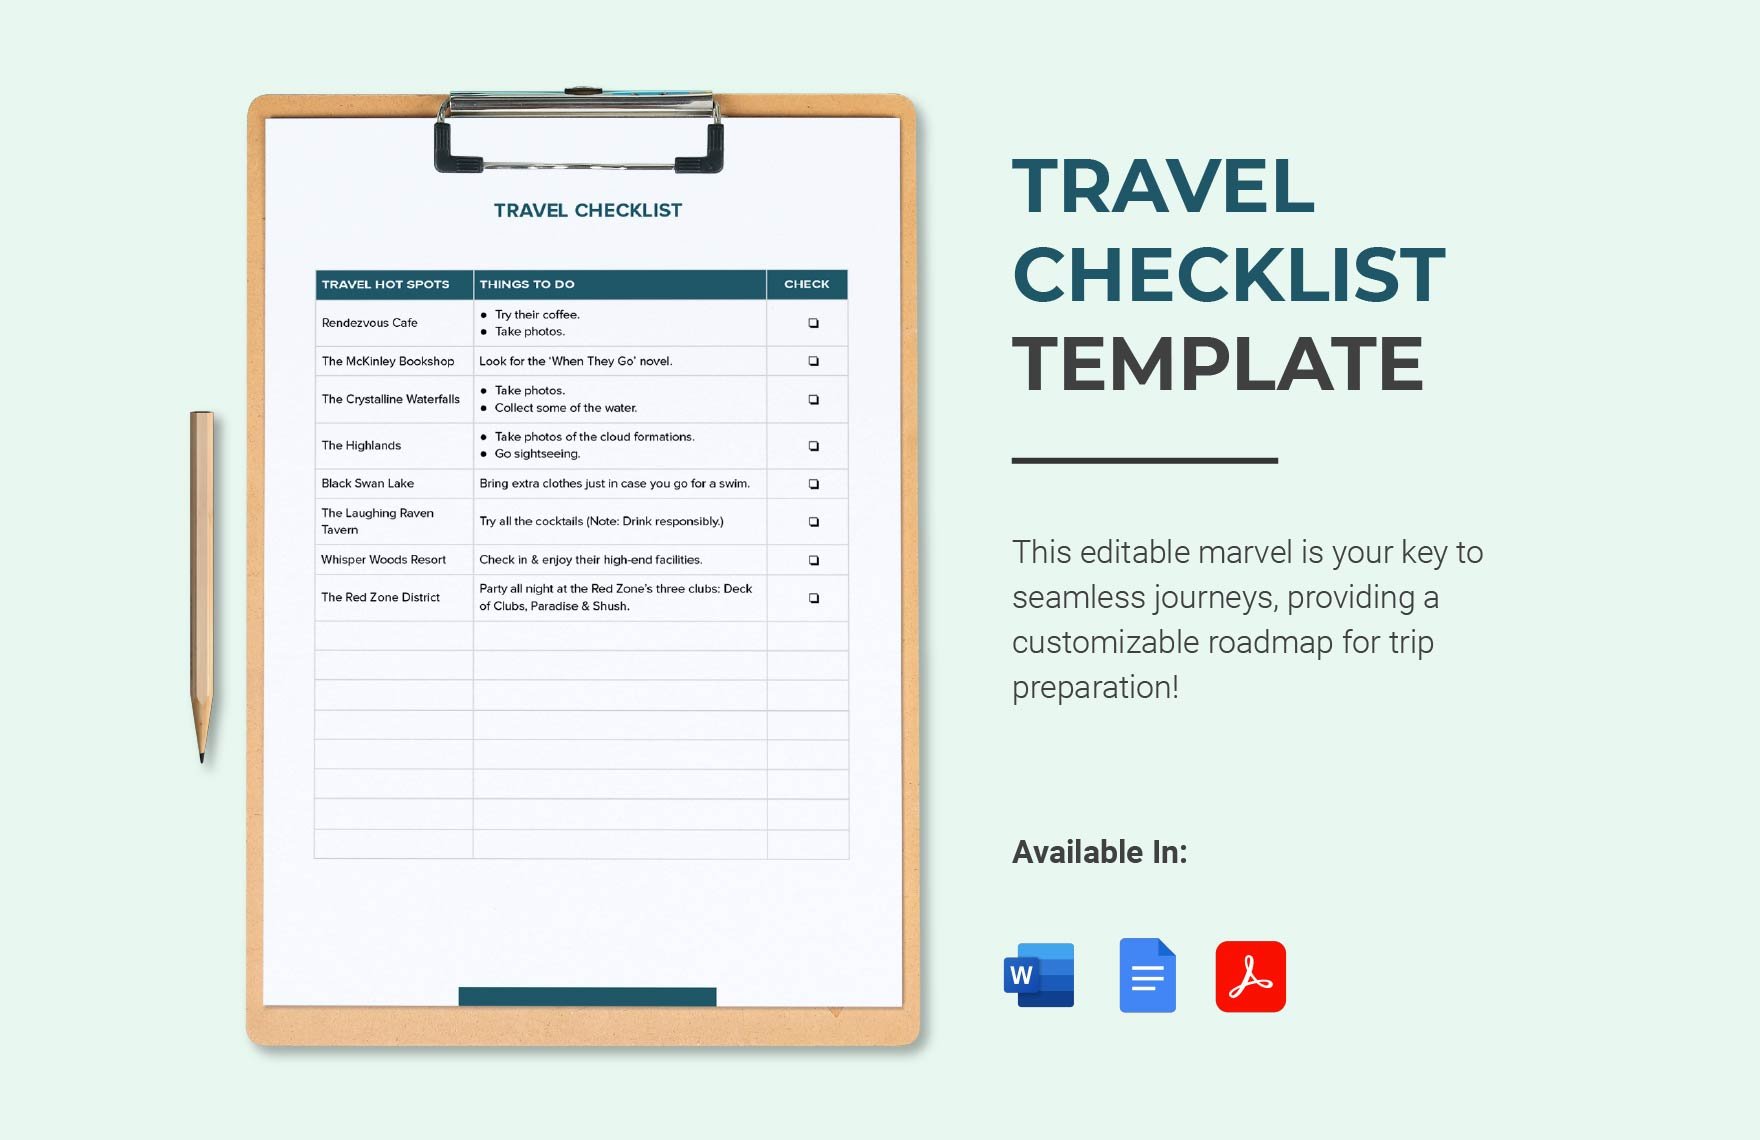 Free Travel Checklist Template in Word, Google Docs, PDF, Apple Pages